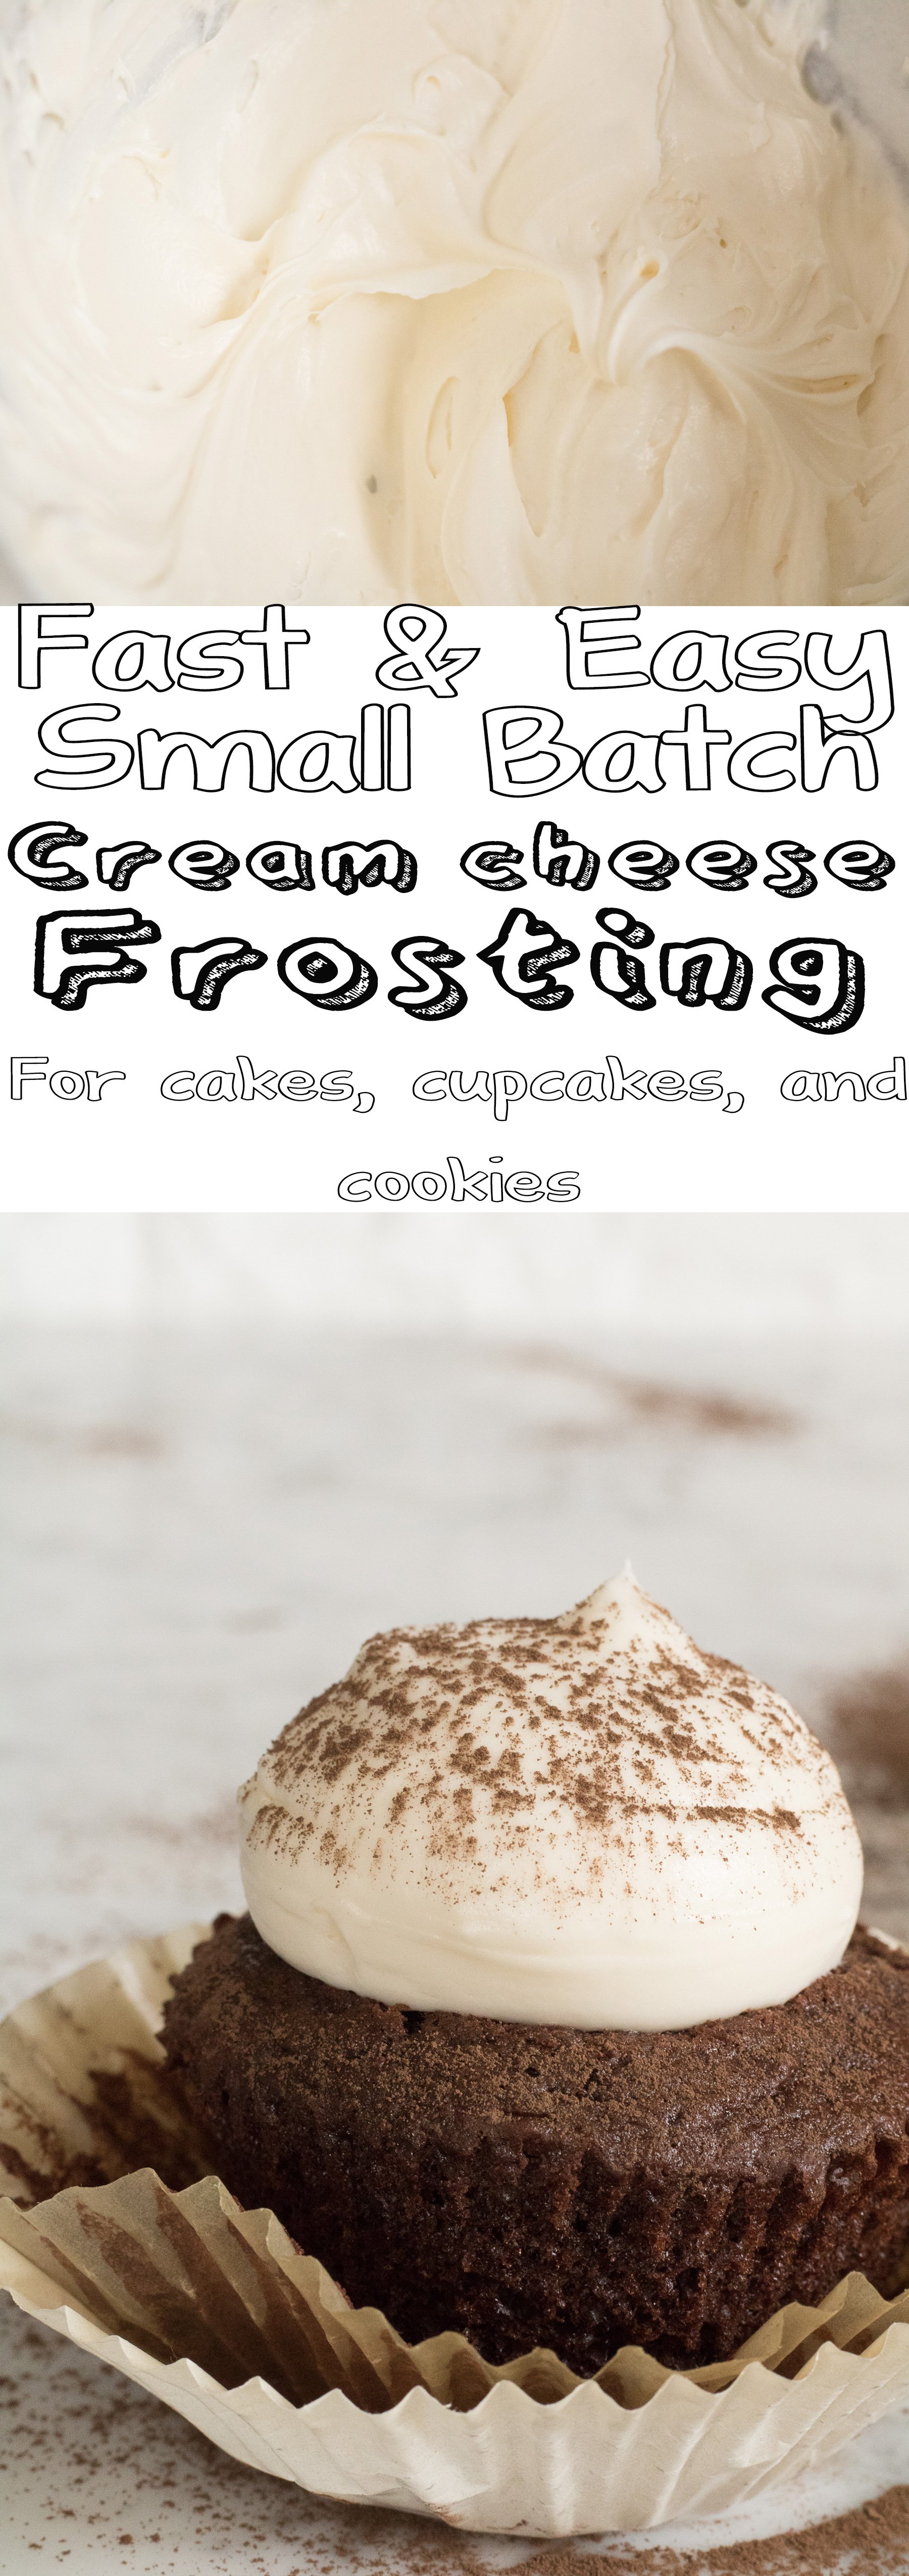 Fast and easy small batch cream cheese frosting photo for pinterest